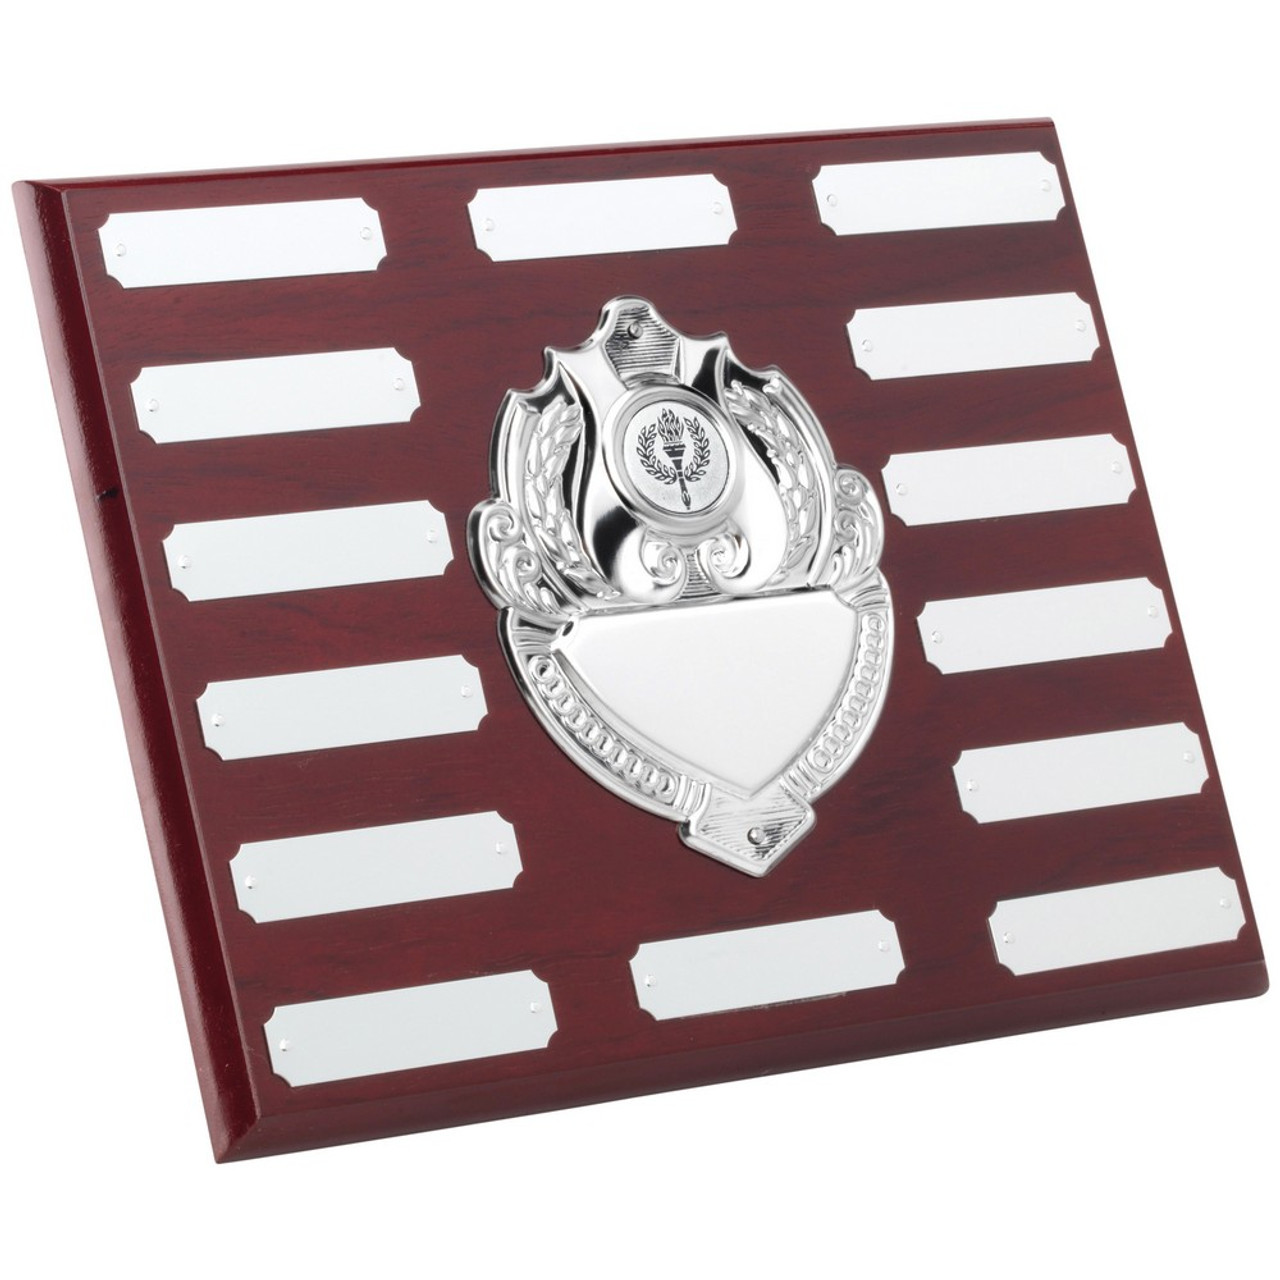 8 x 10" Mahogany 14 Year Engraving Plaque with 15 chrome engraving plates.